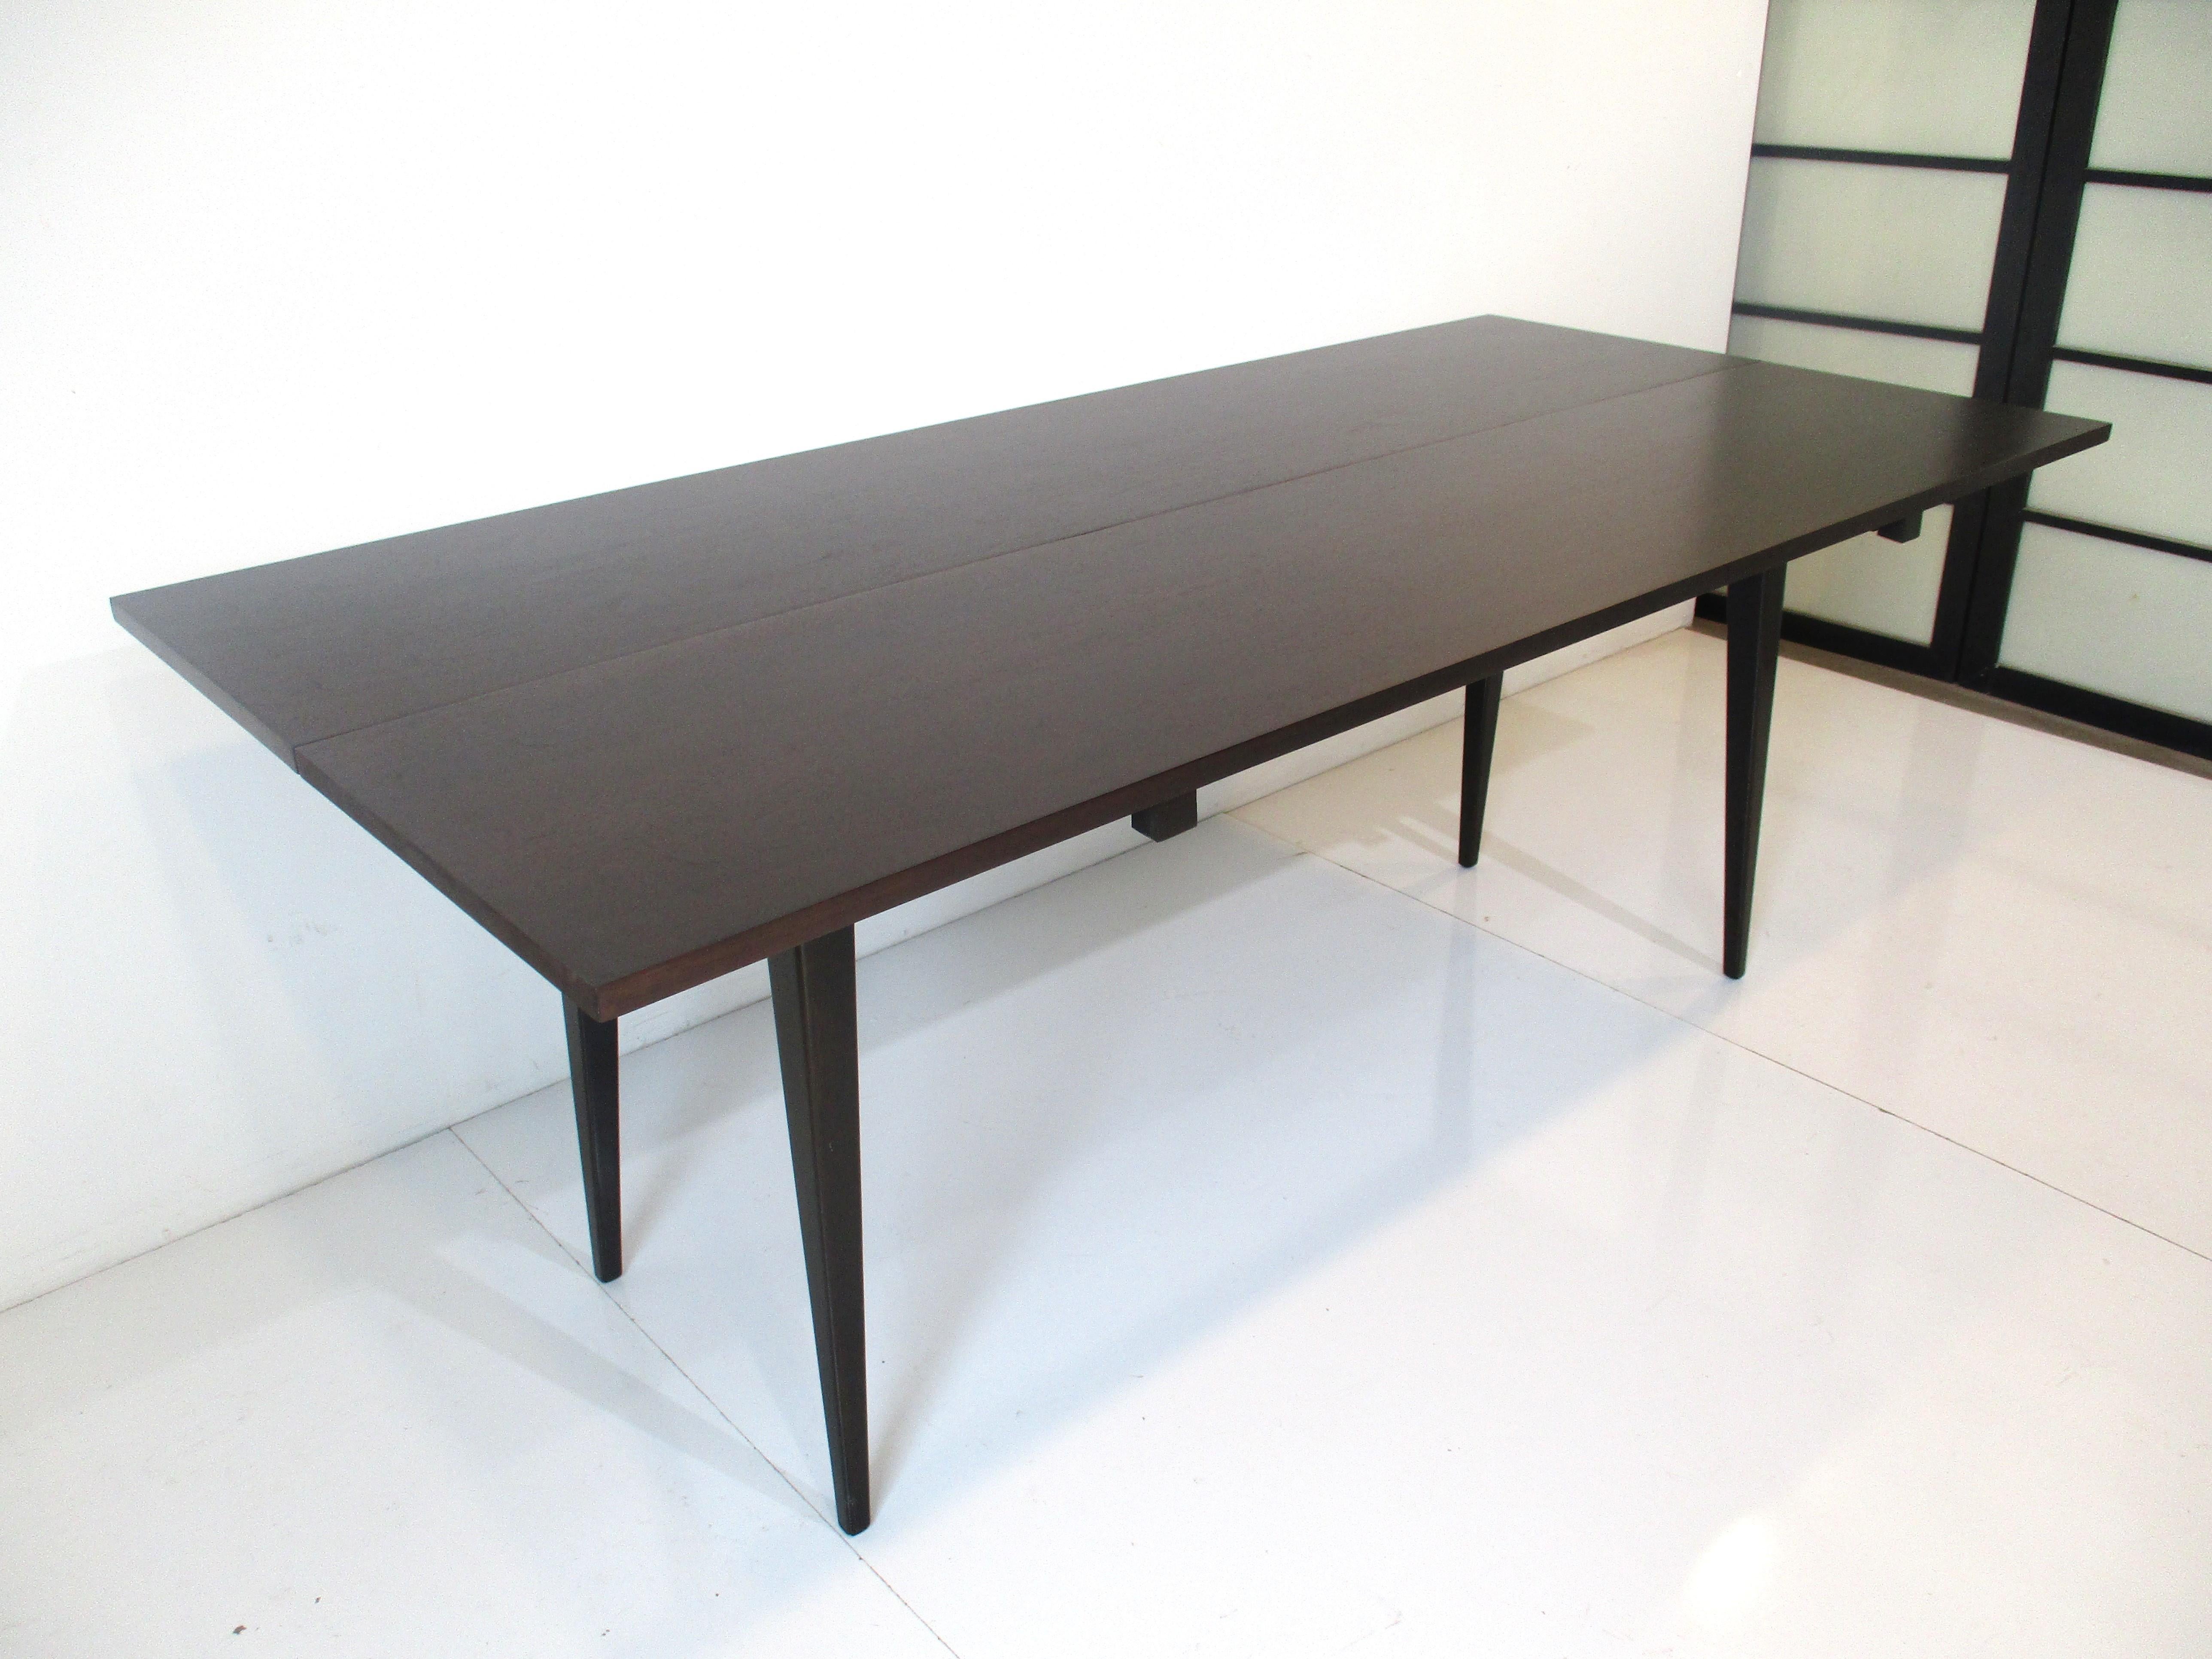 American Dunbar Filp Top Console / Dining Table by Edward Wormley